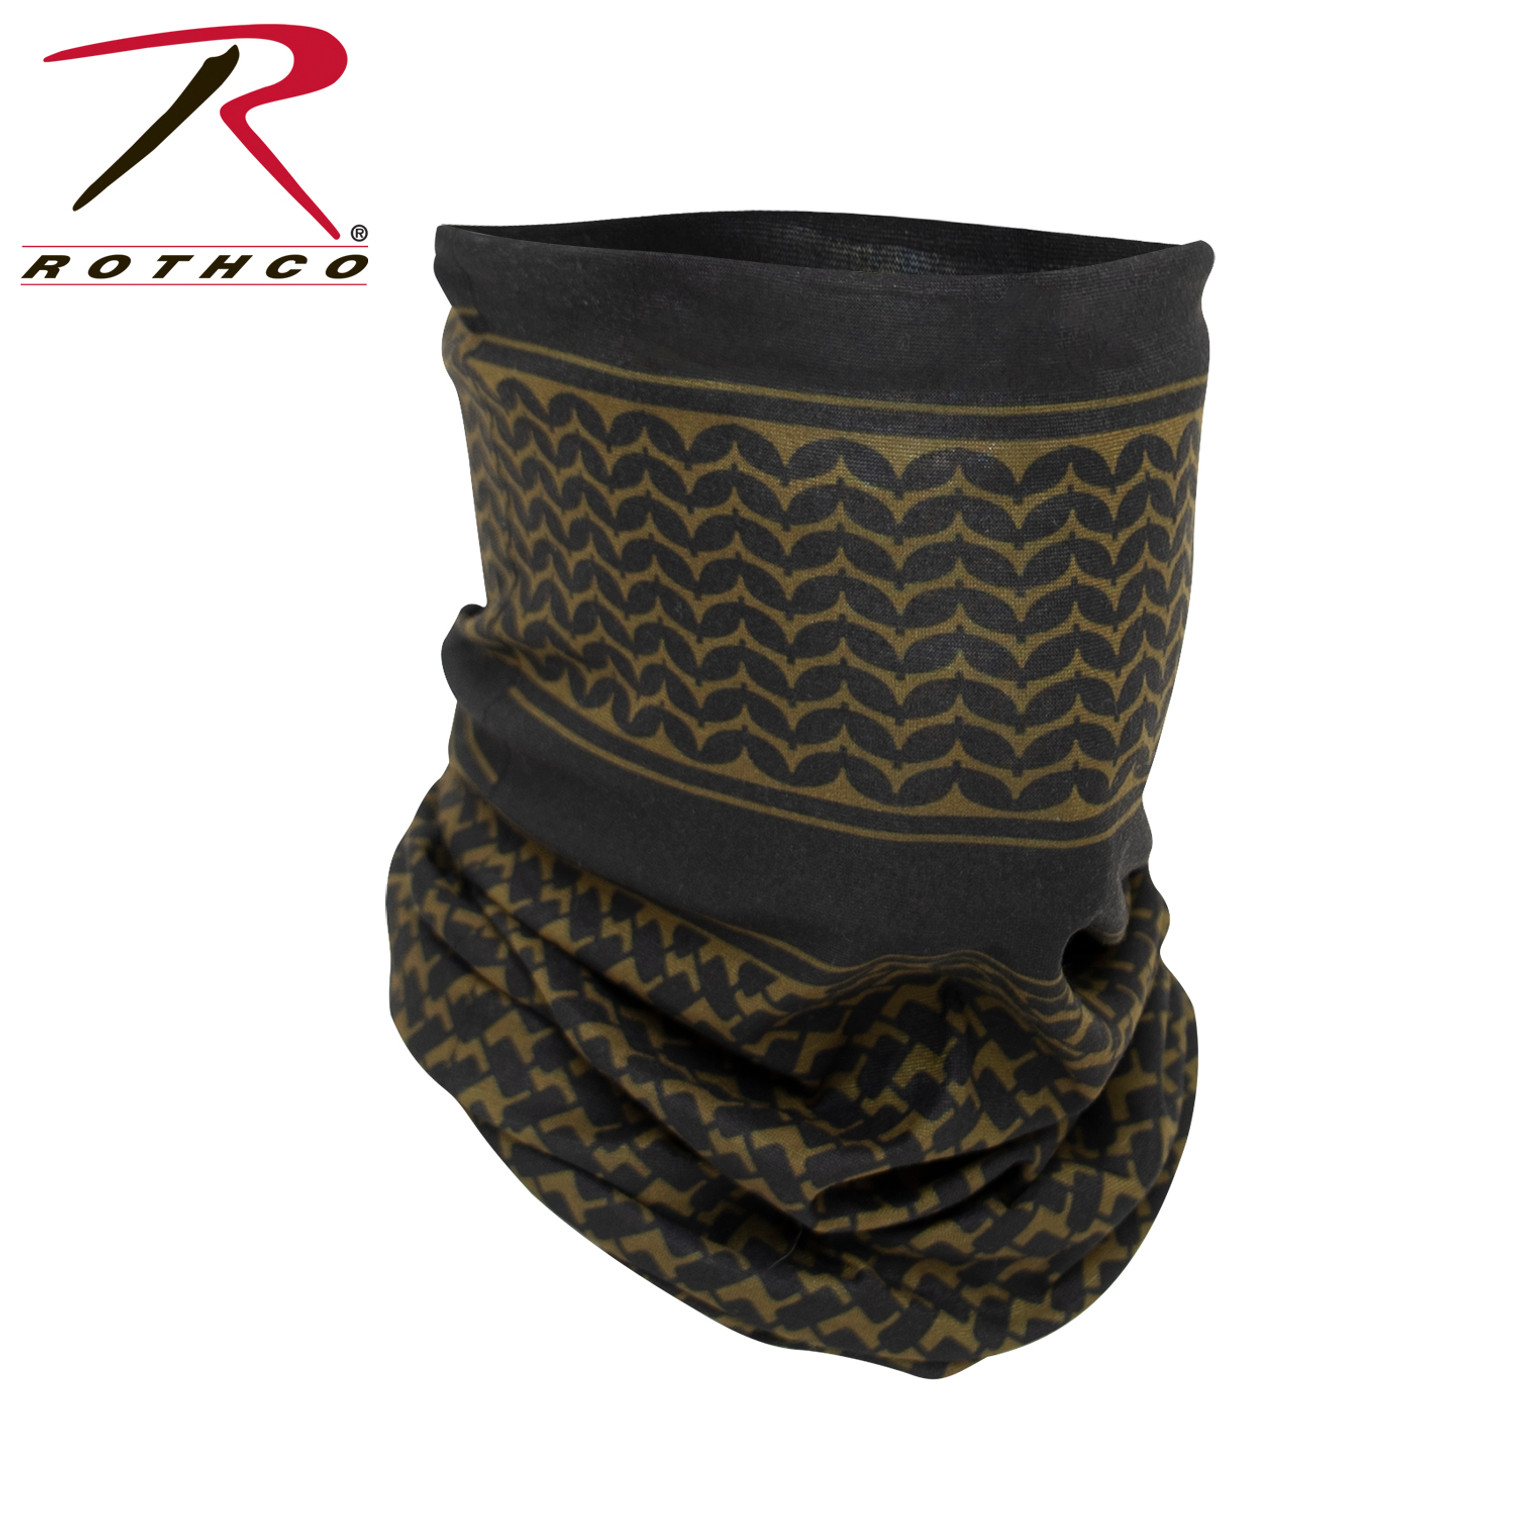 Rothco Multi-Use Tactical Wrap with Shemagh Print - Coyote Brown